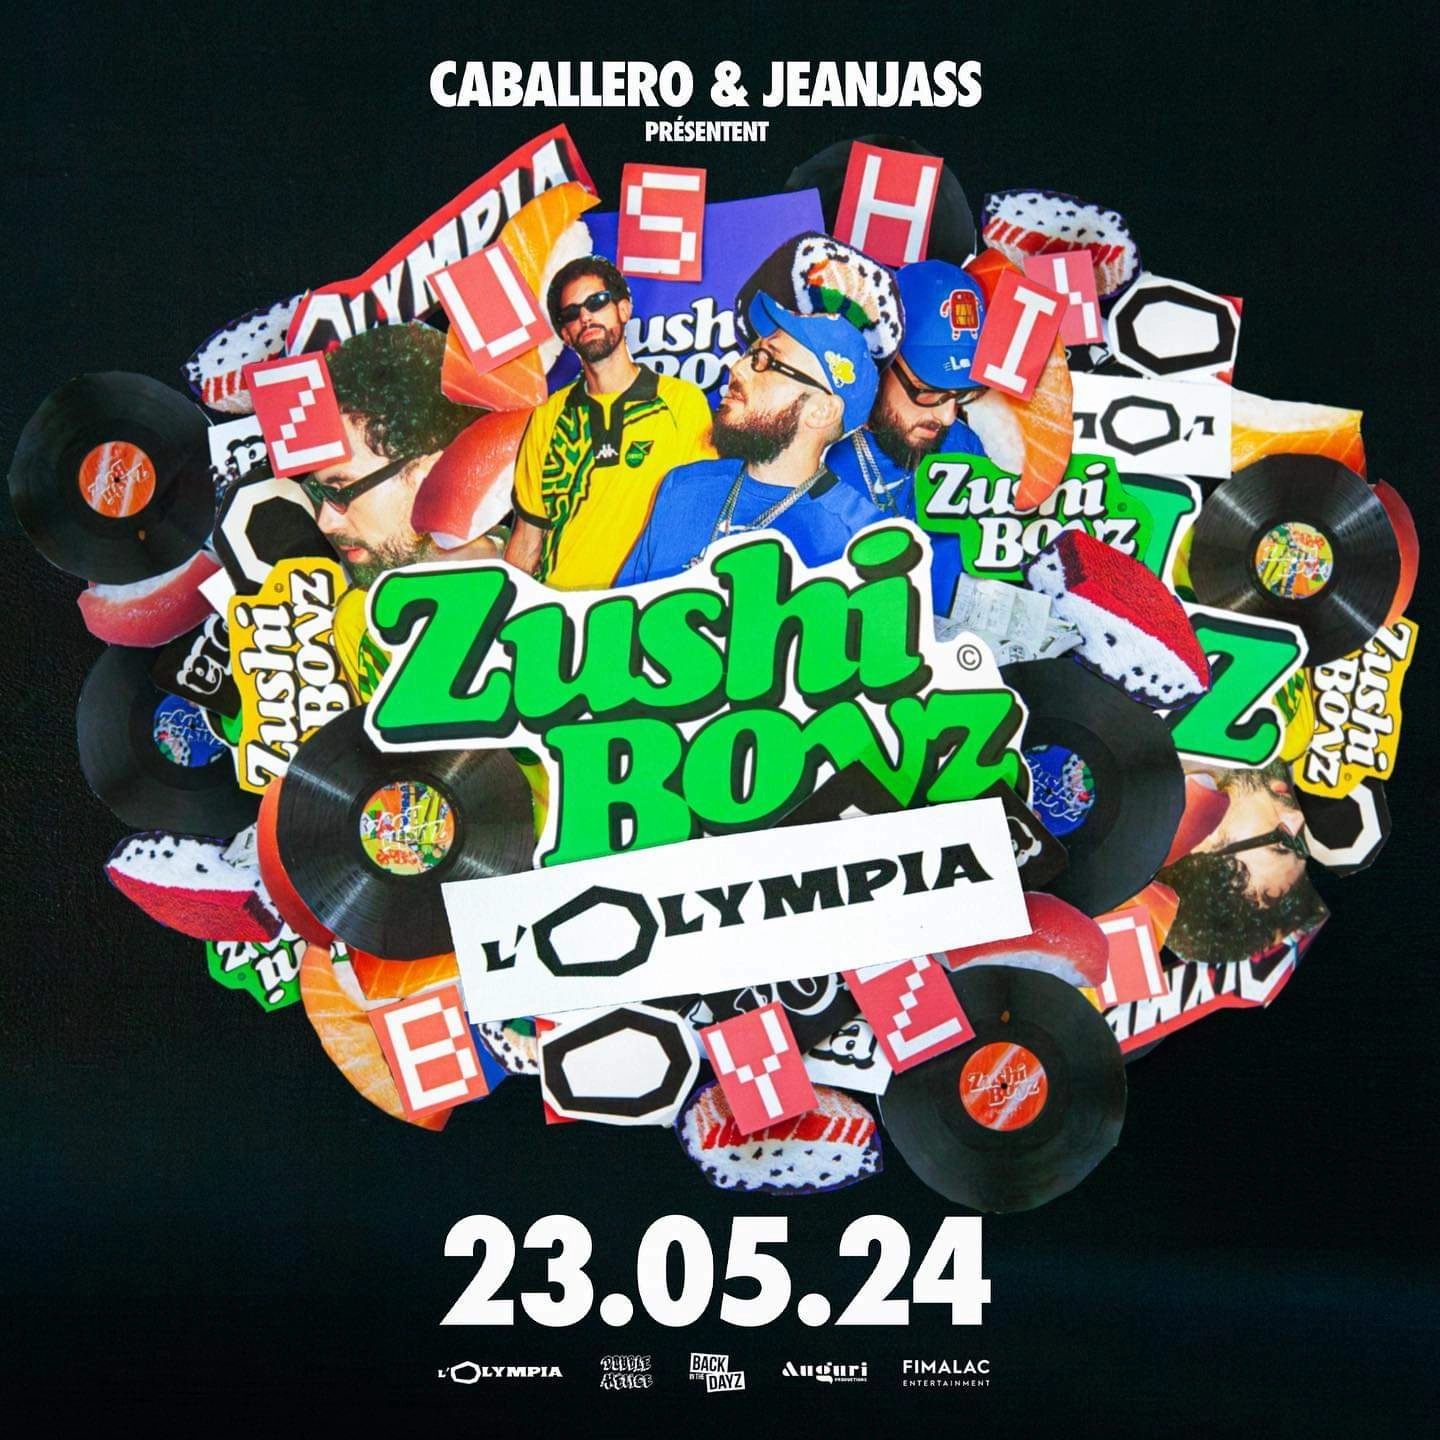 Caballero JeanJass in der Olympia Tickets